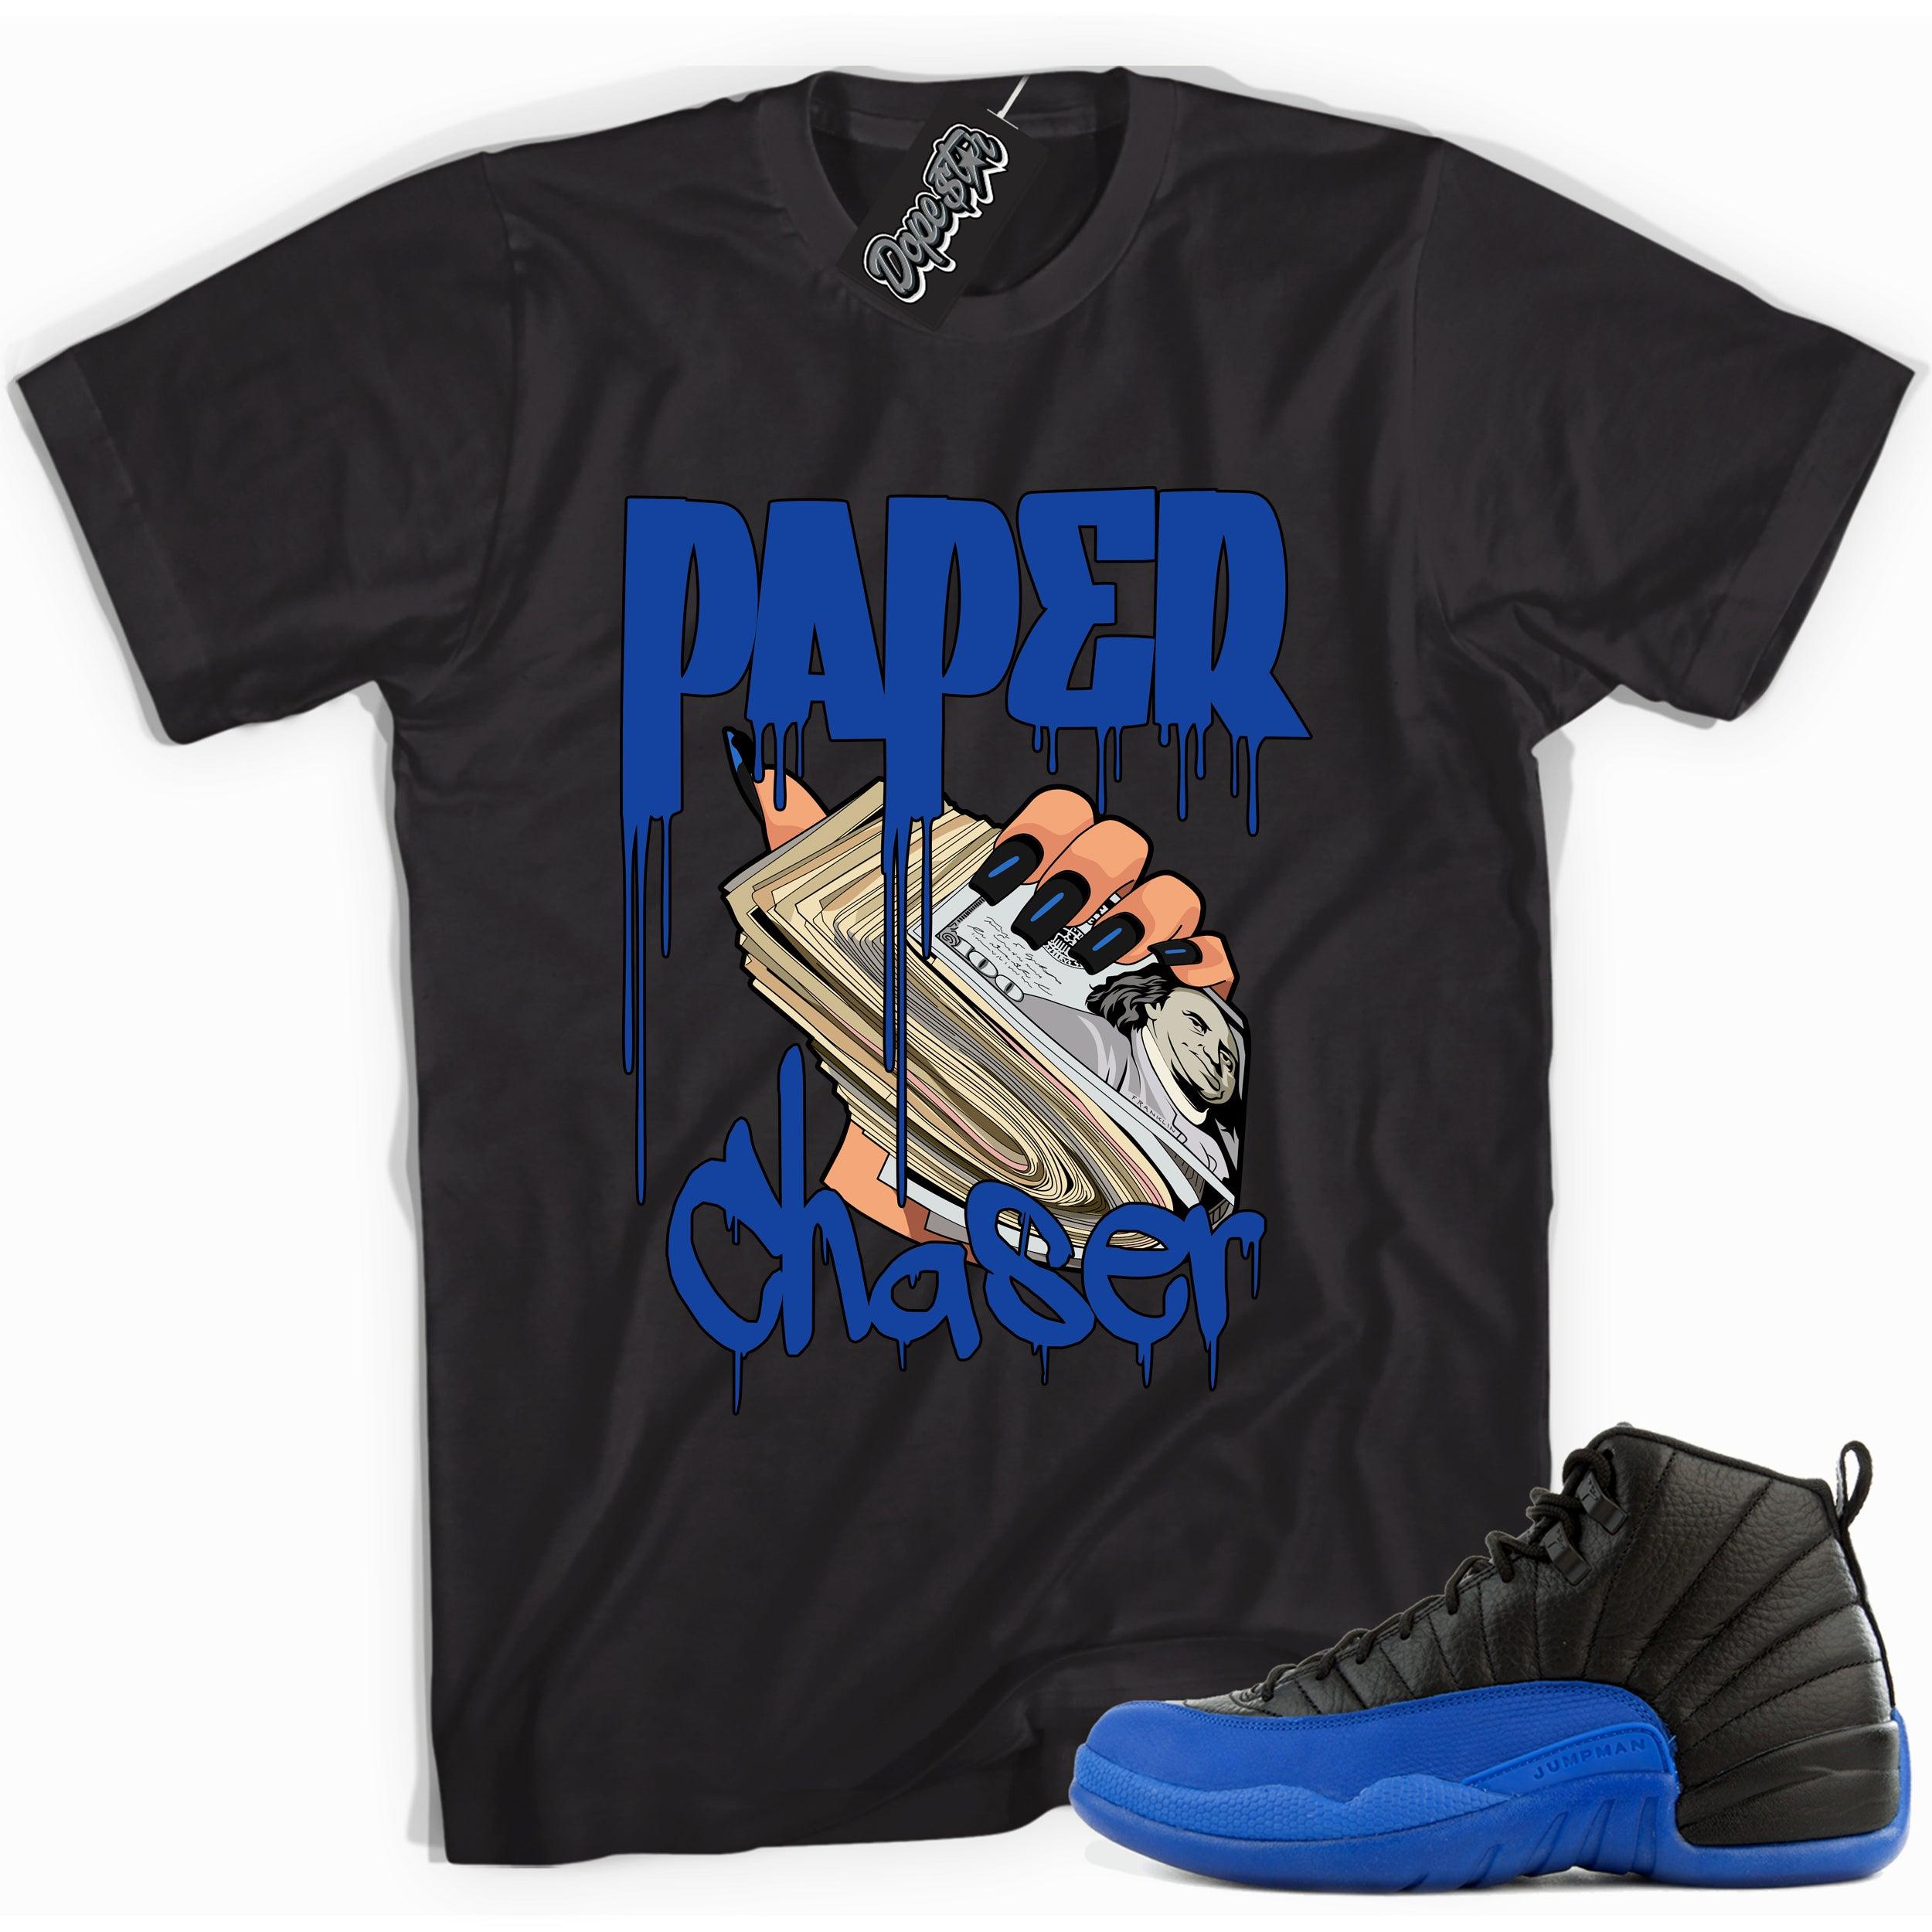 Cool black graphic tee with 'paper chaser' print, that perfectly matches  Air Jordan 12 Retro Black Game Royal sneakers.